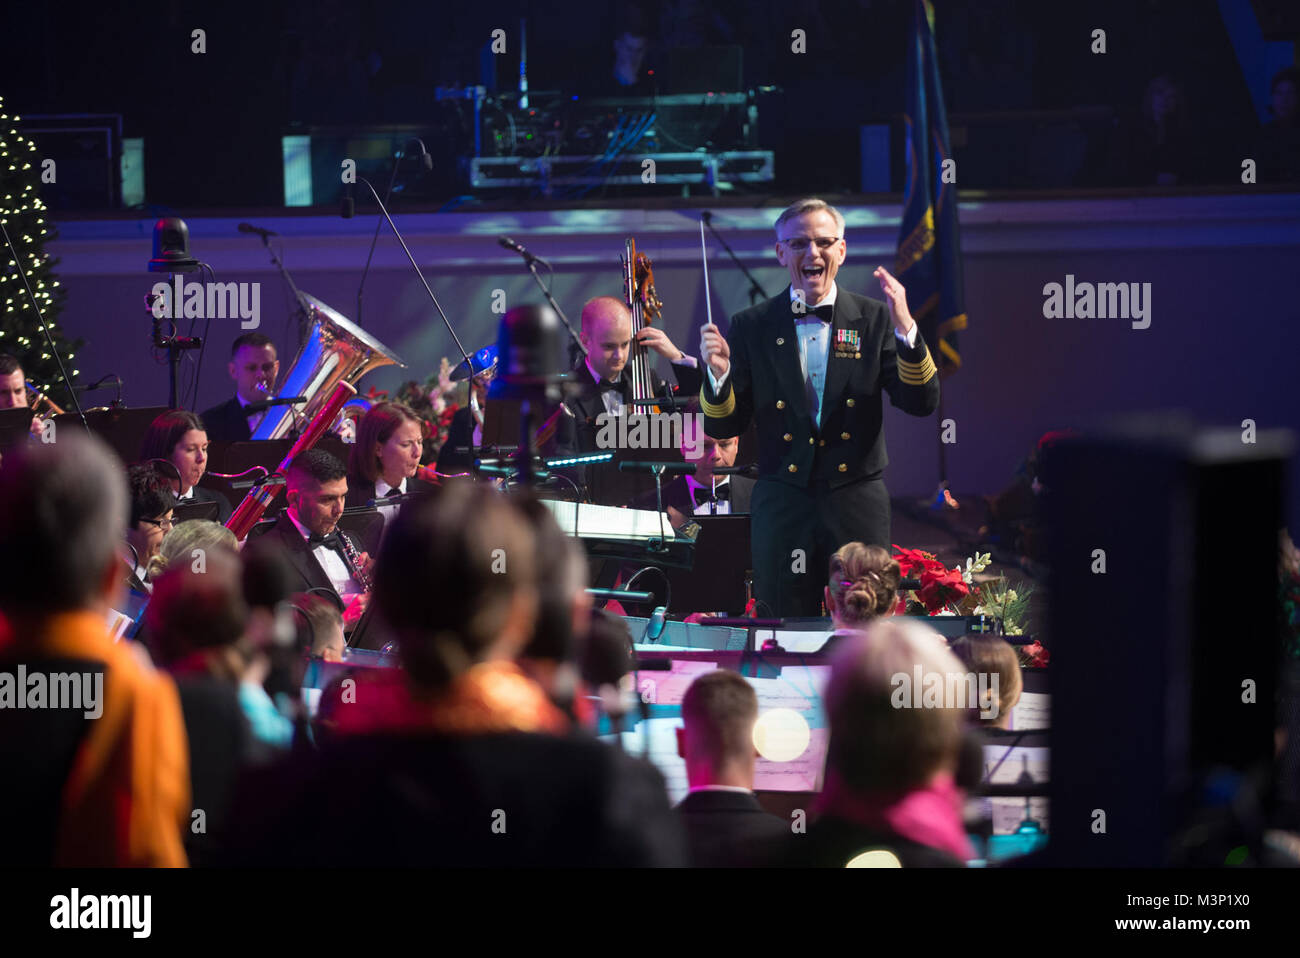 171216-N-VV903-1200 WASHINGTON (Dec. 16, 2017) Captain Kenneth Collins leads the  U.S. Navy Band during a holiday concert at DAR Constitution Hall in Washington. The Navy Band hosted thousands of people from the Washington area as well as hundreds of senior Navy and government officials during its three annual holiday concerts. (U.S. Navy photo by Musician 1st Class David Aspinwall/Released) 171216-N-VV903-1200 by United States Navy Band Stock Photo